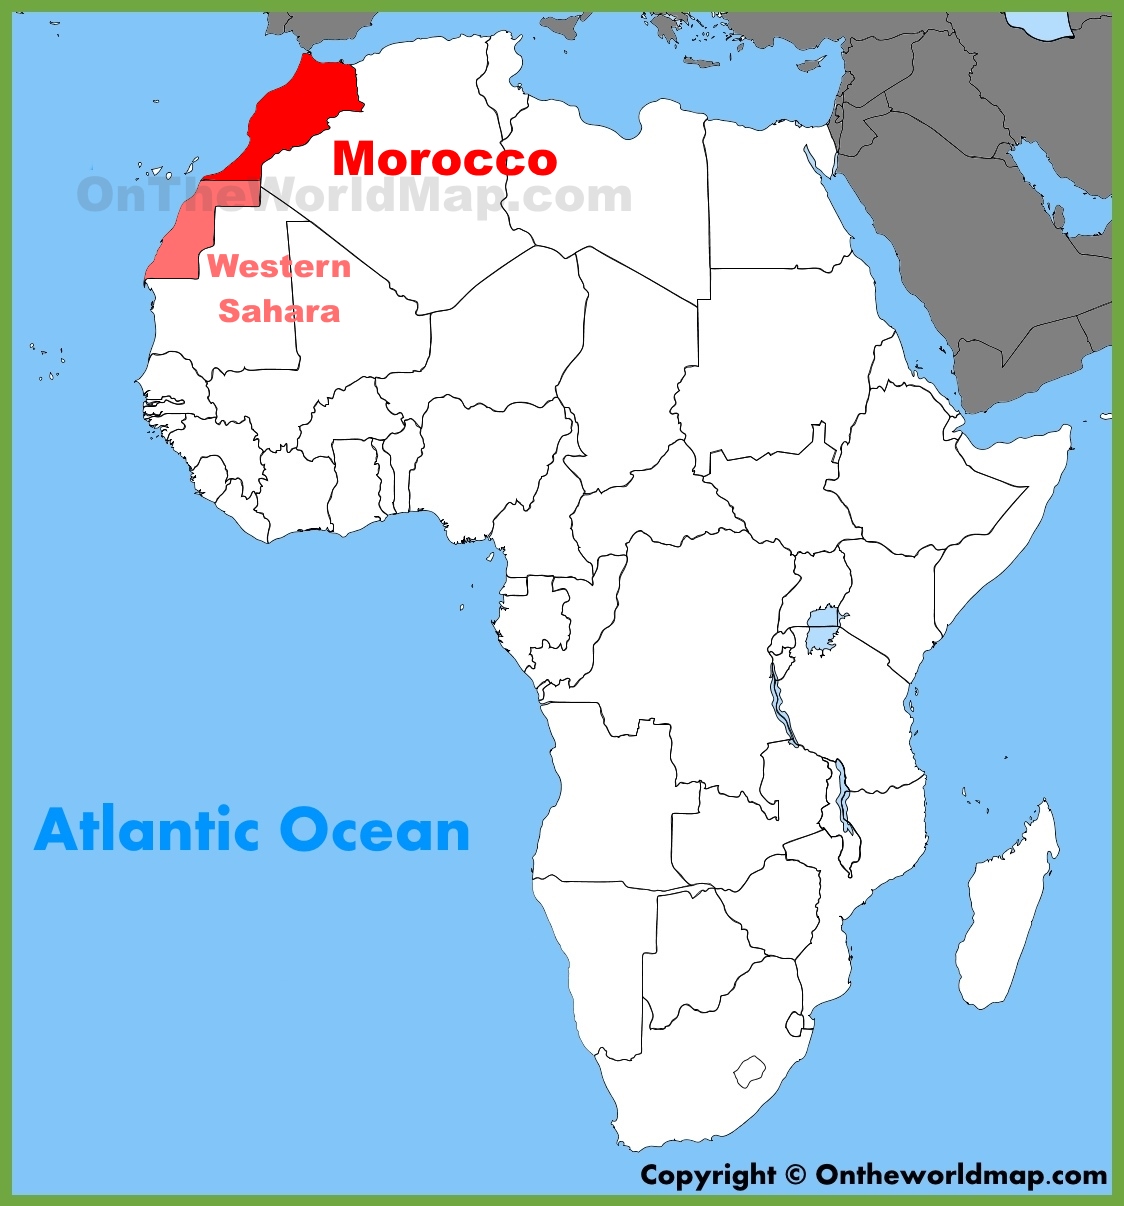 morocco-location-on-the-africa-map.jpg